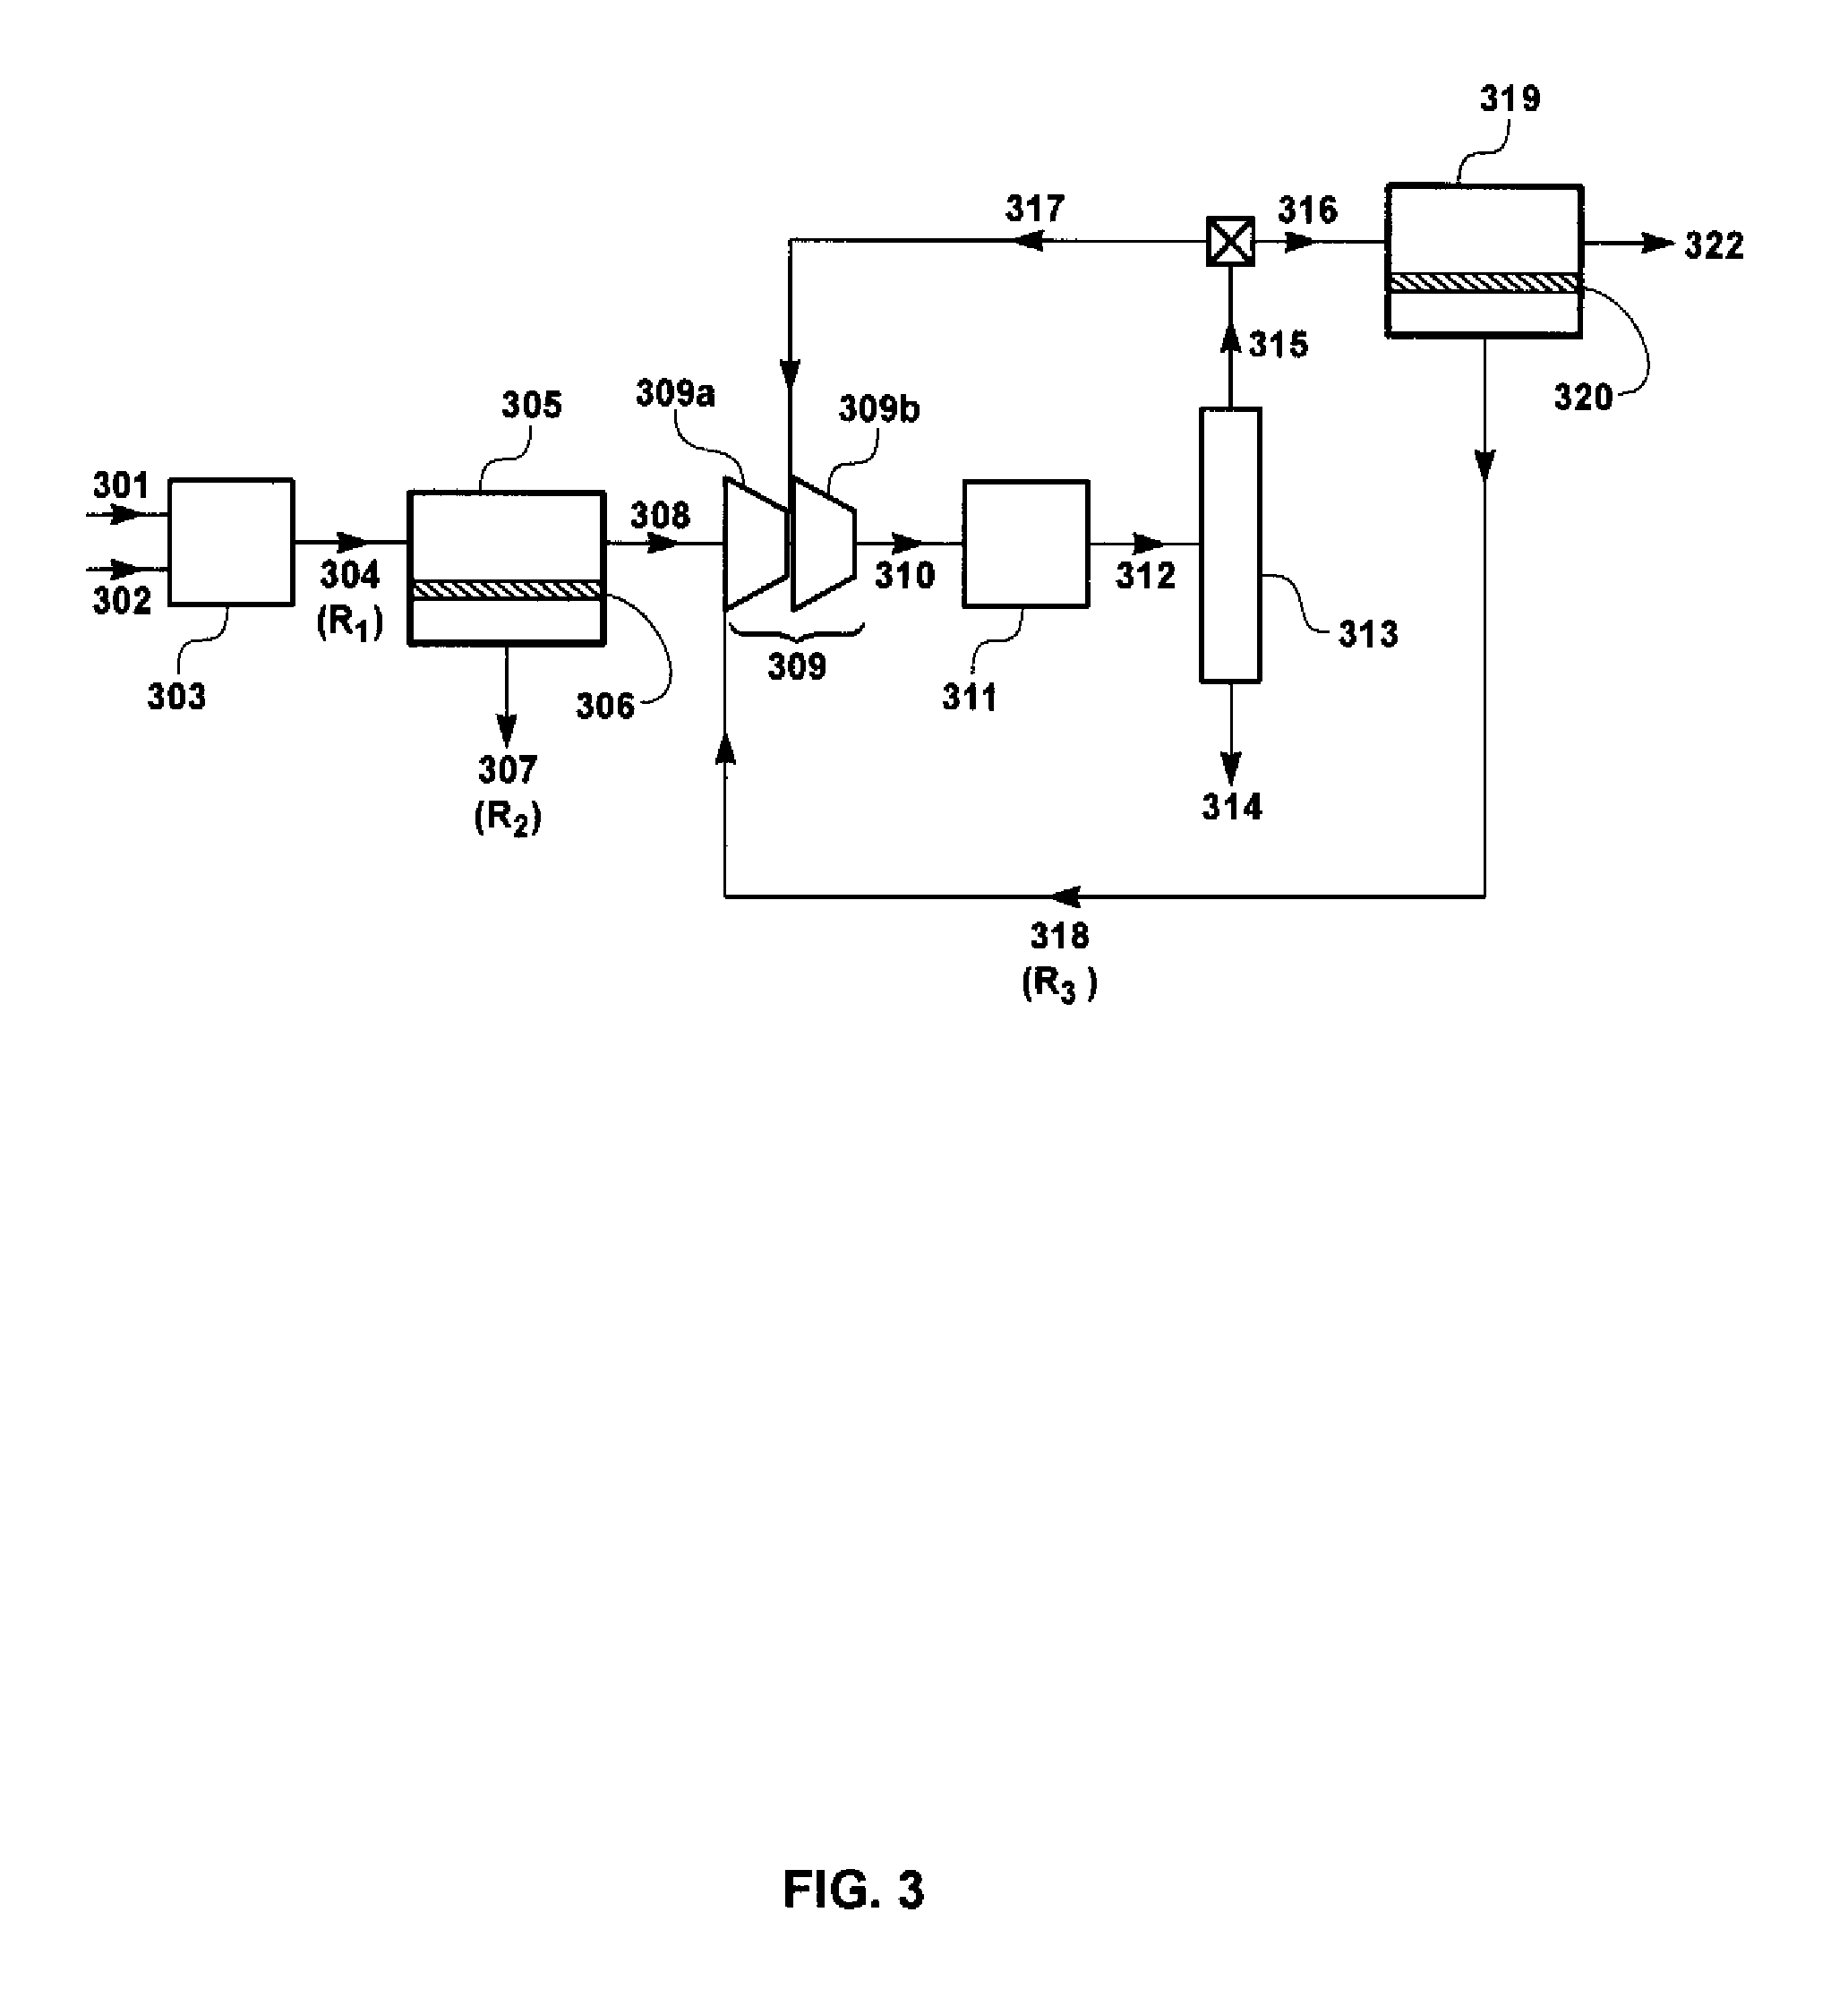 Process for the production of methanol including one or more membrane separation steps